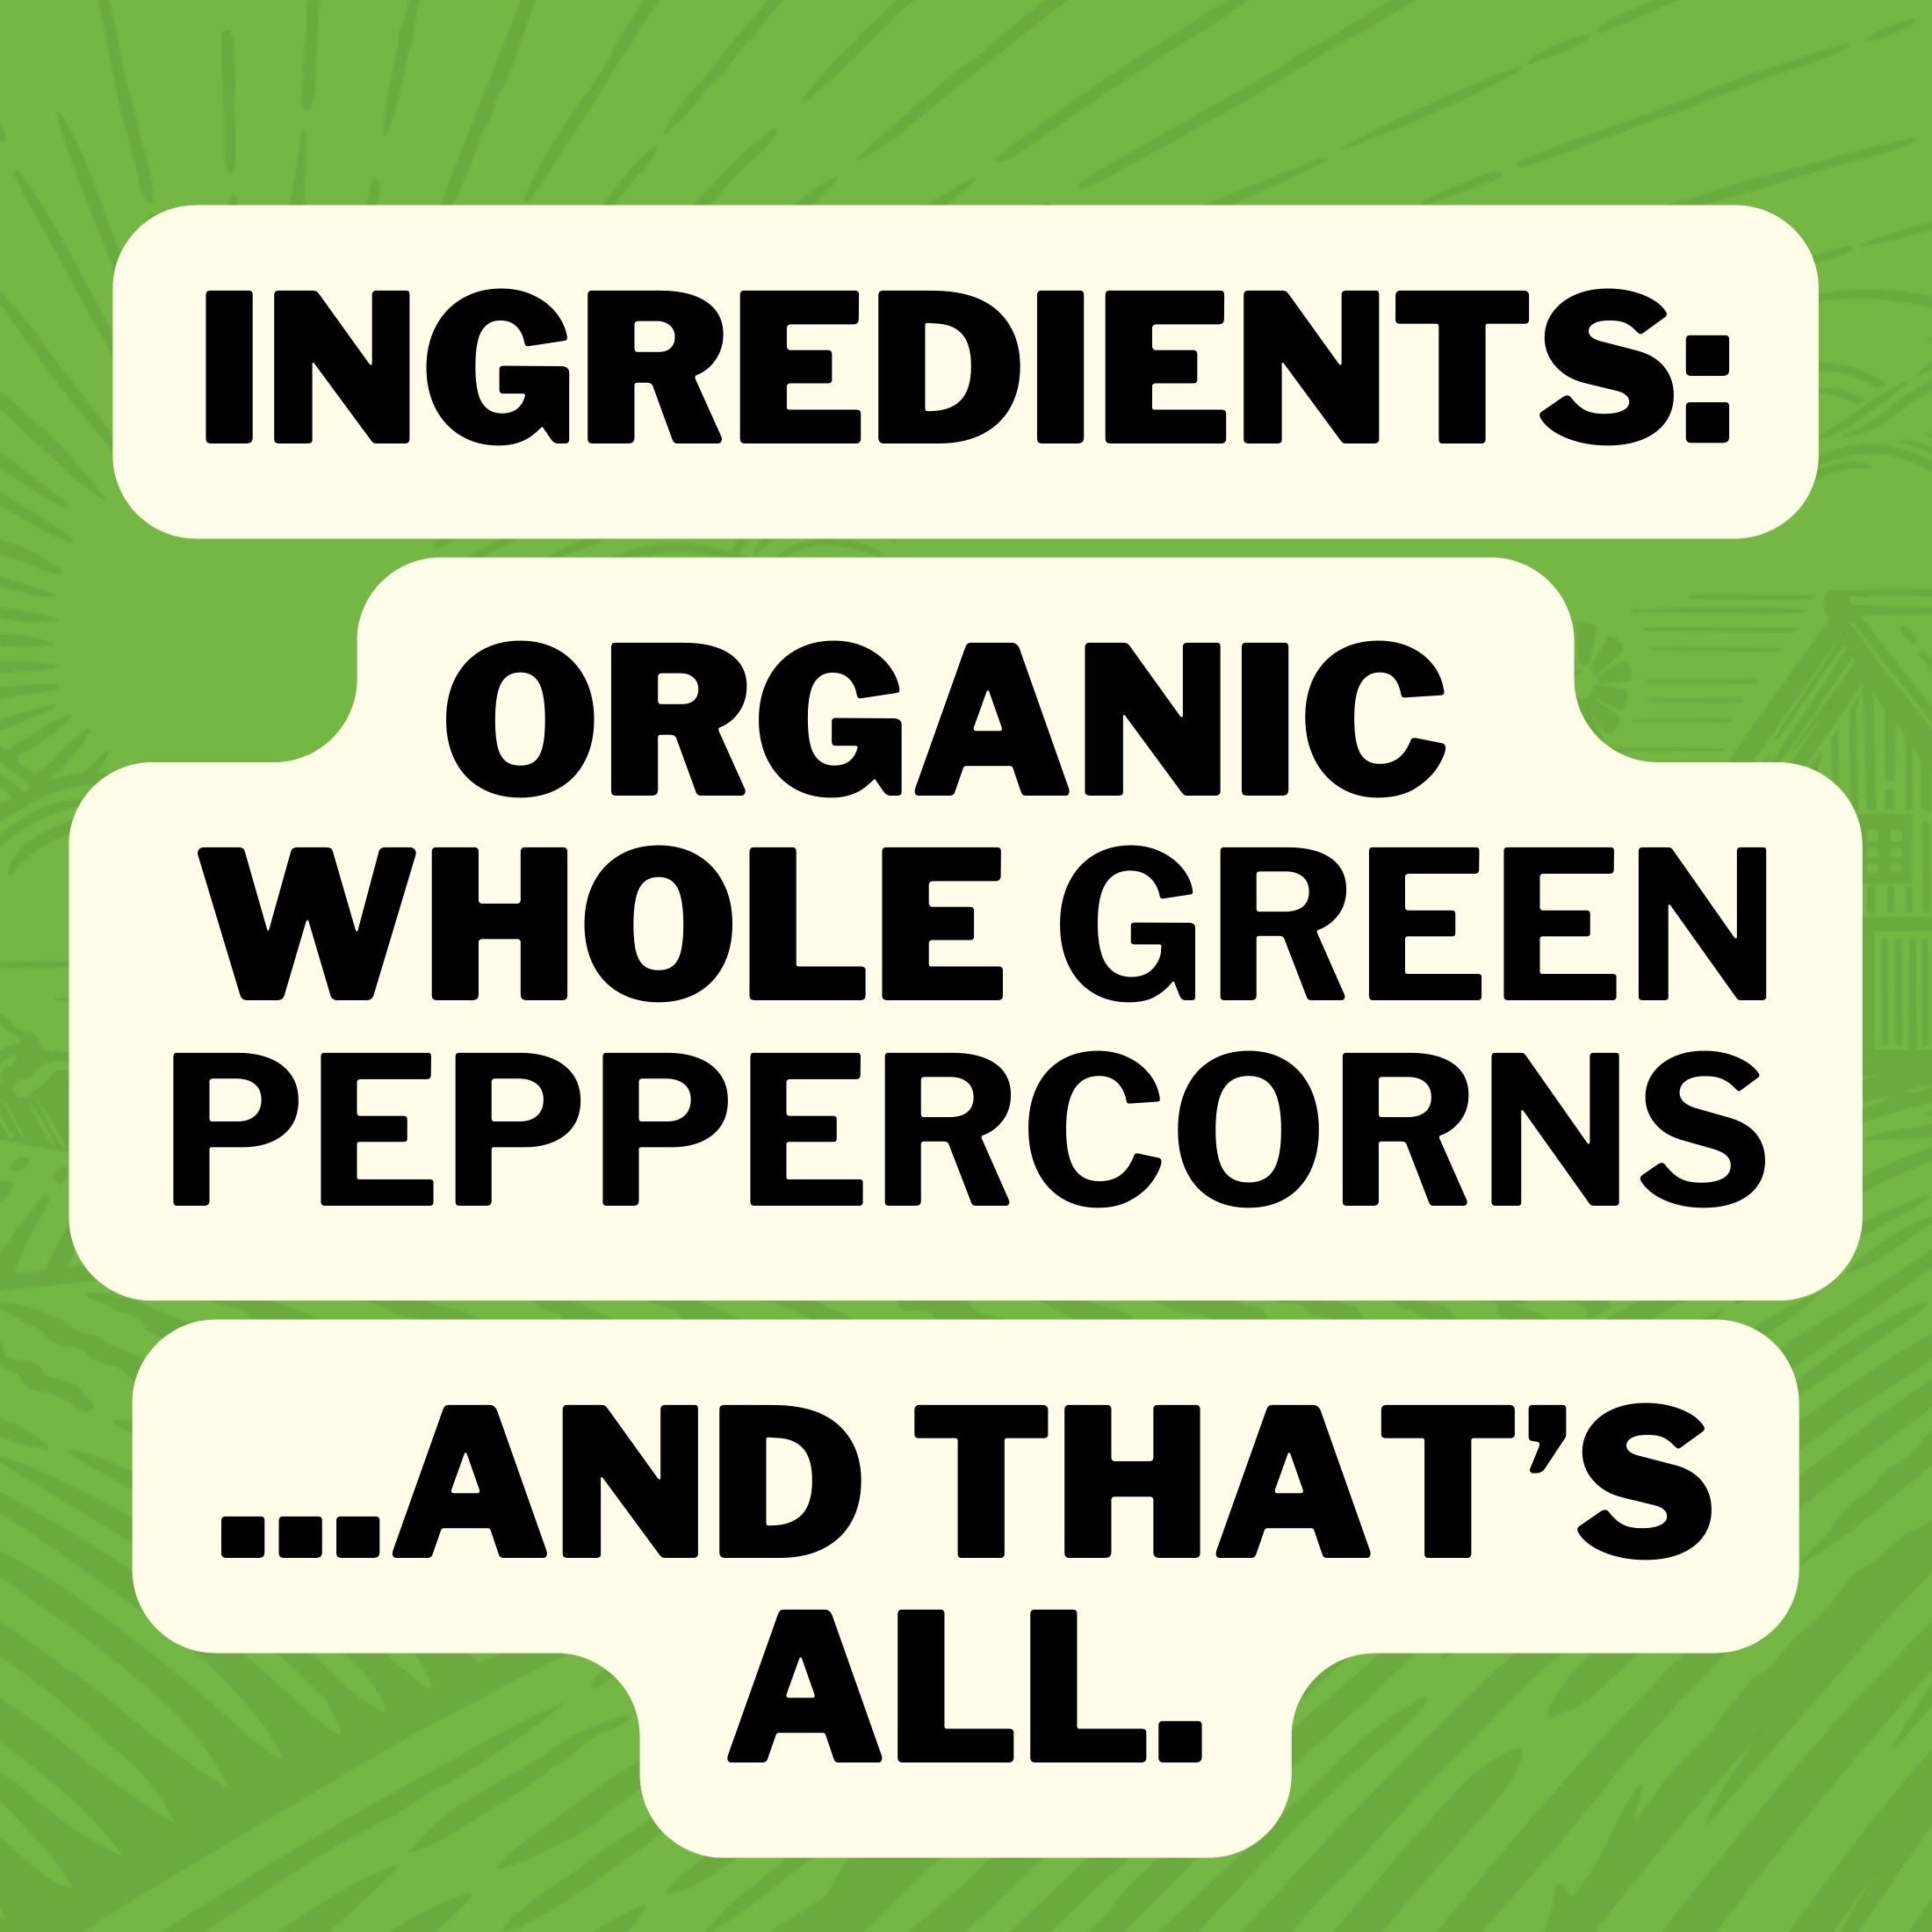 Ingredients: Organic Whole Green Peppercorns ... And That's All.